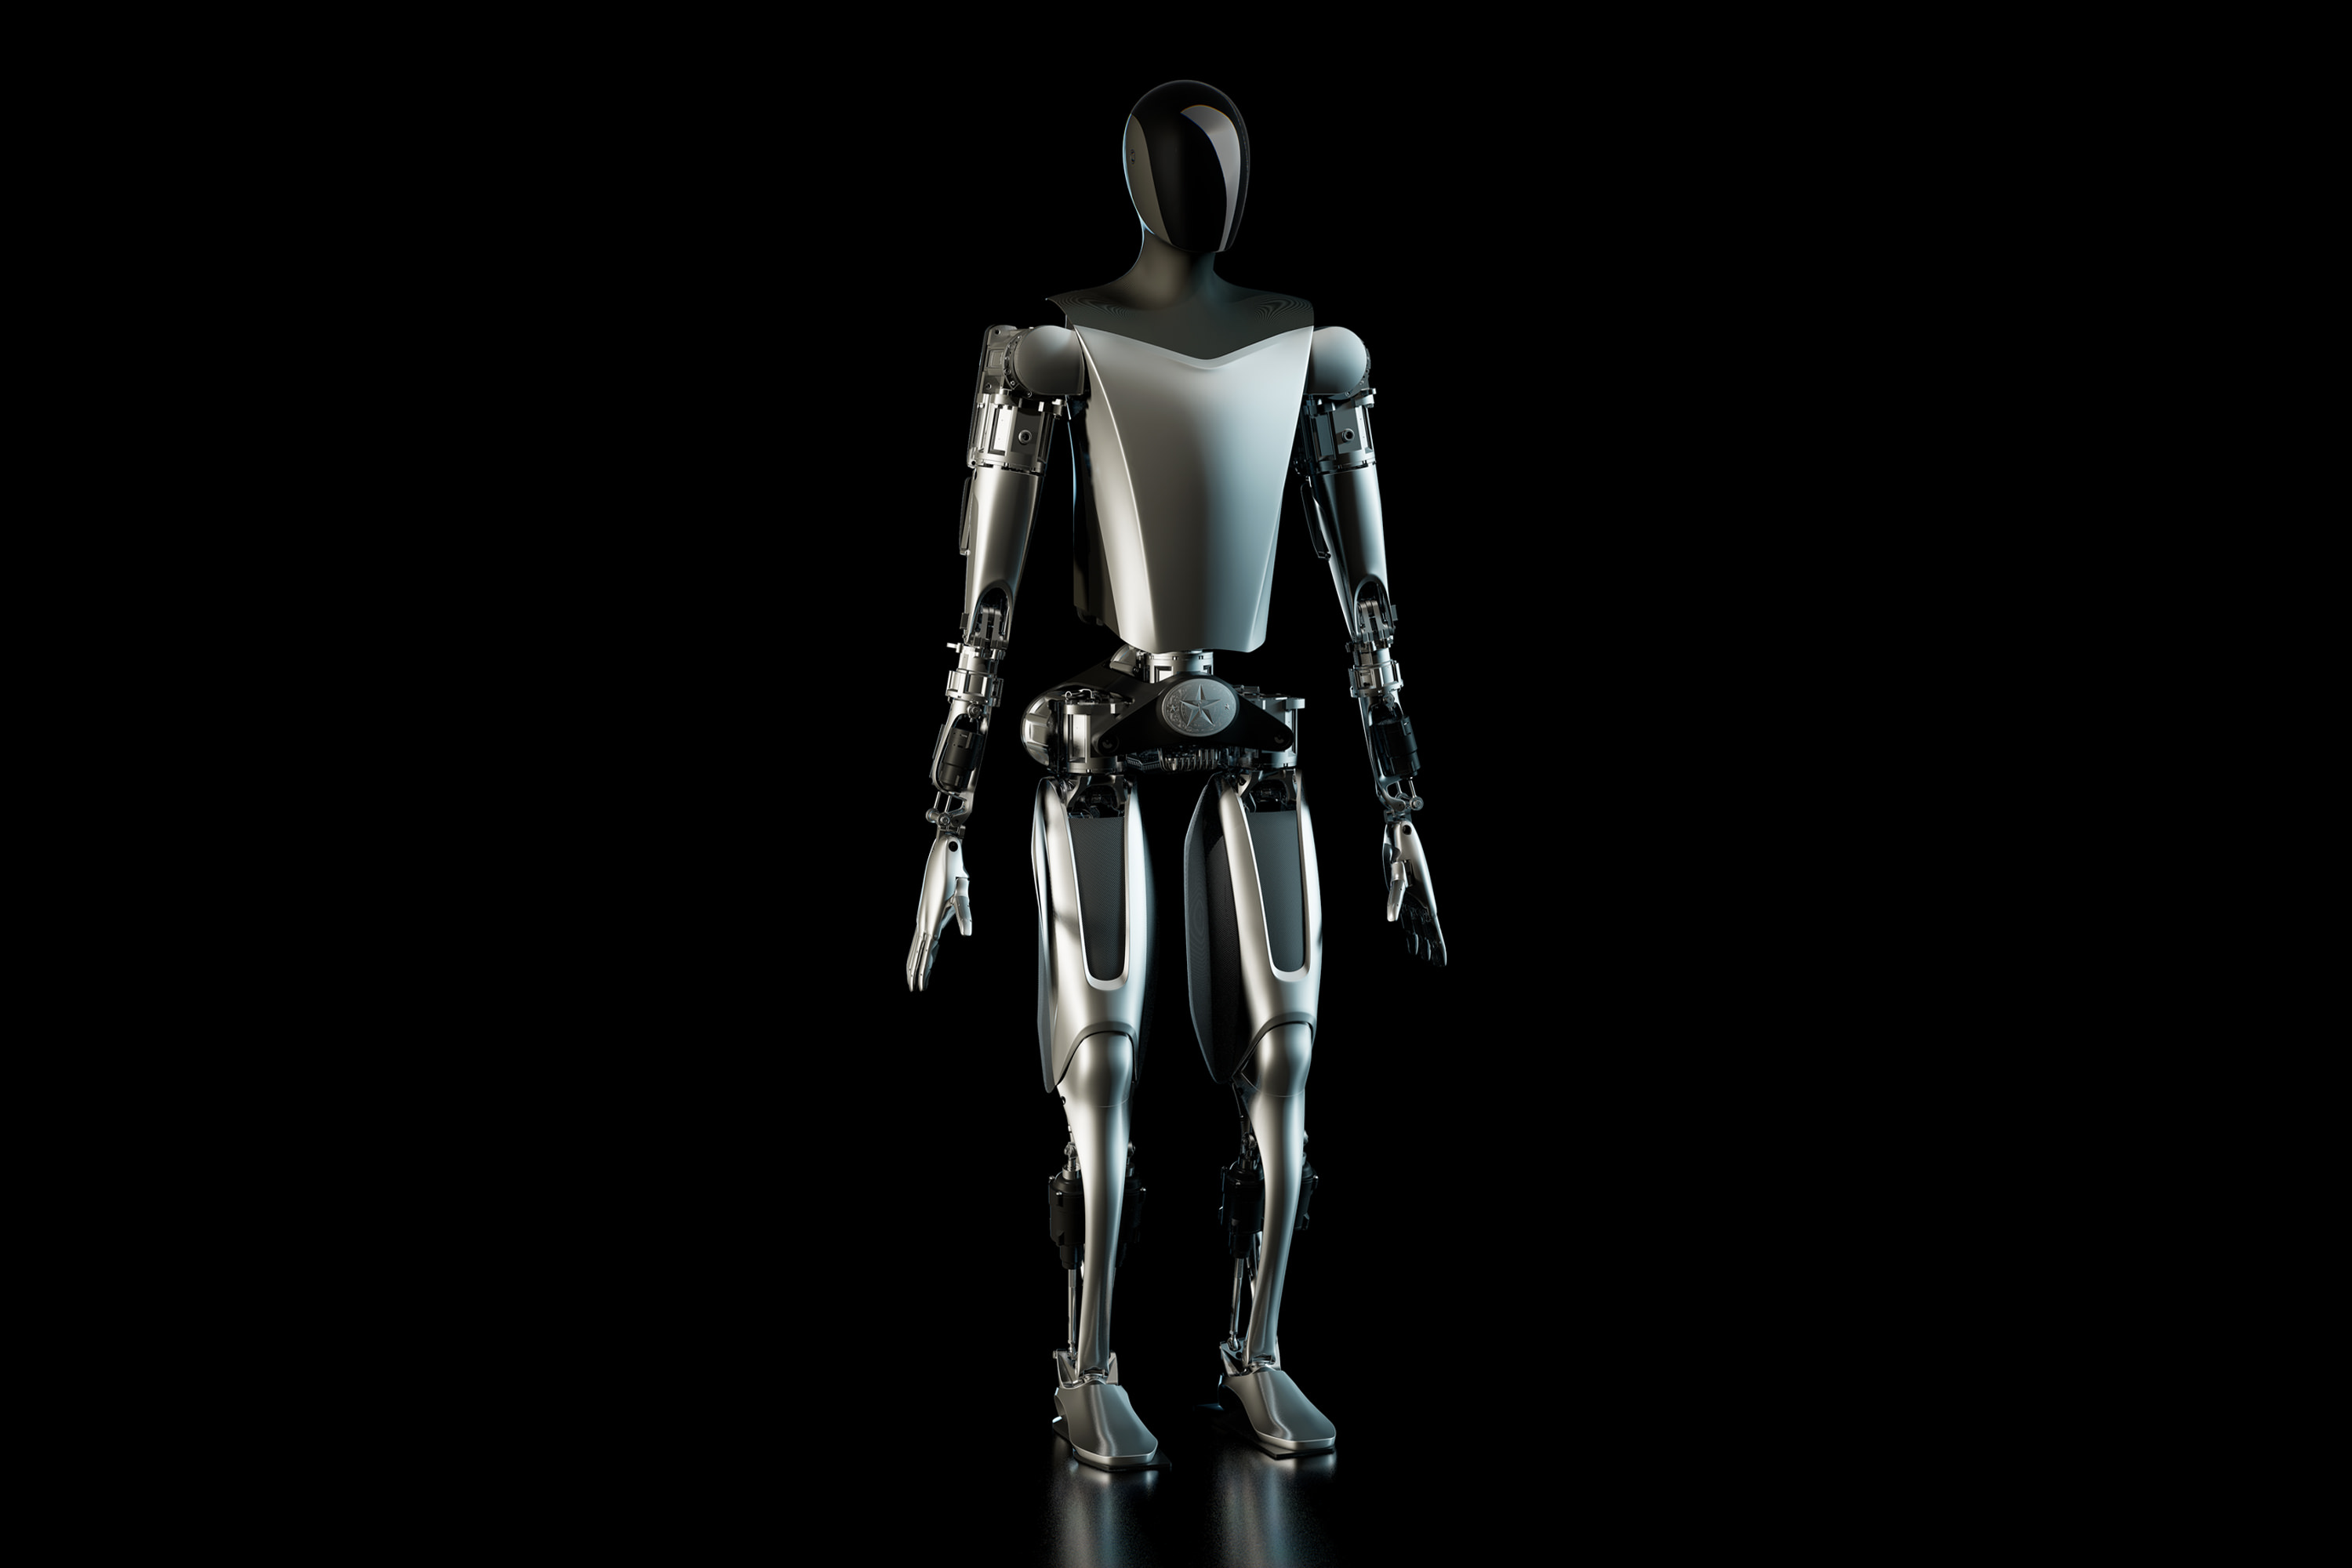 The pre-production sample of the Tesla Optimus humanoid robot render